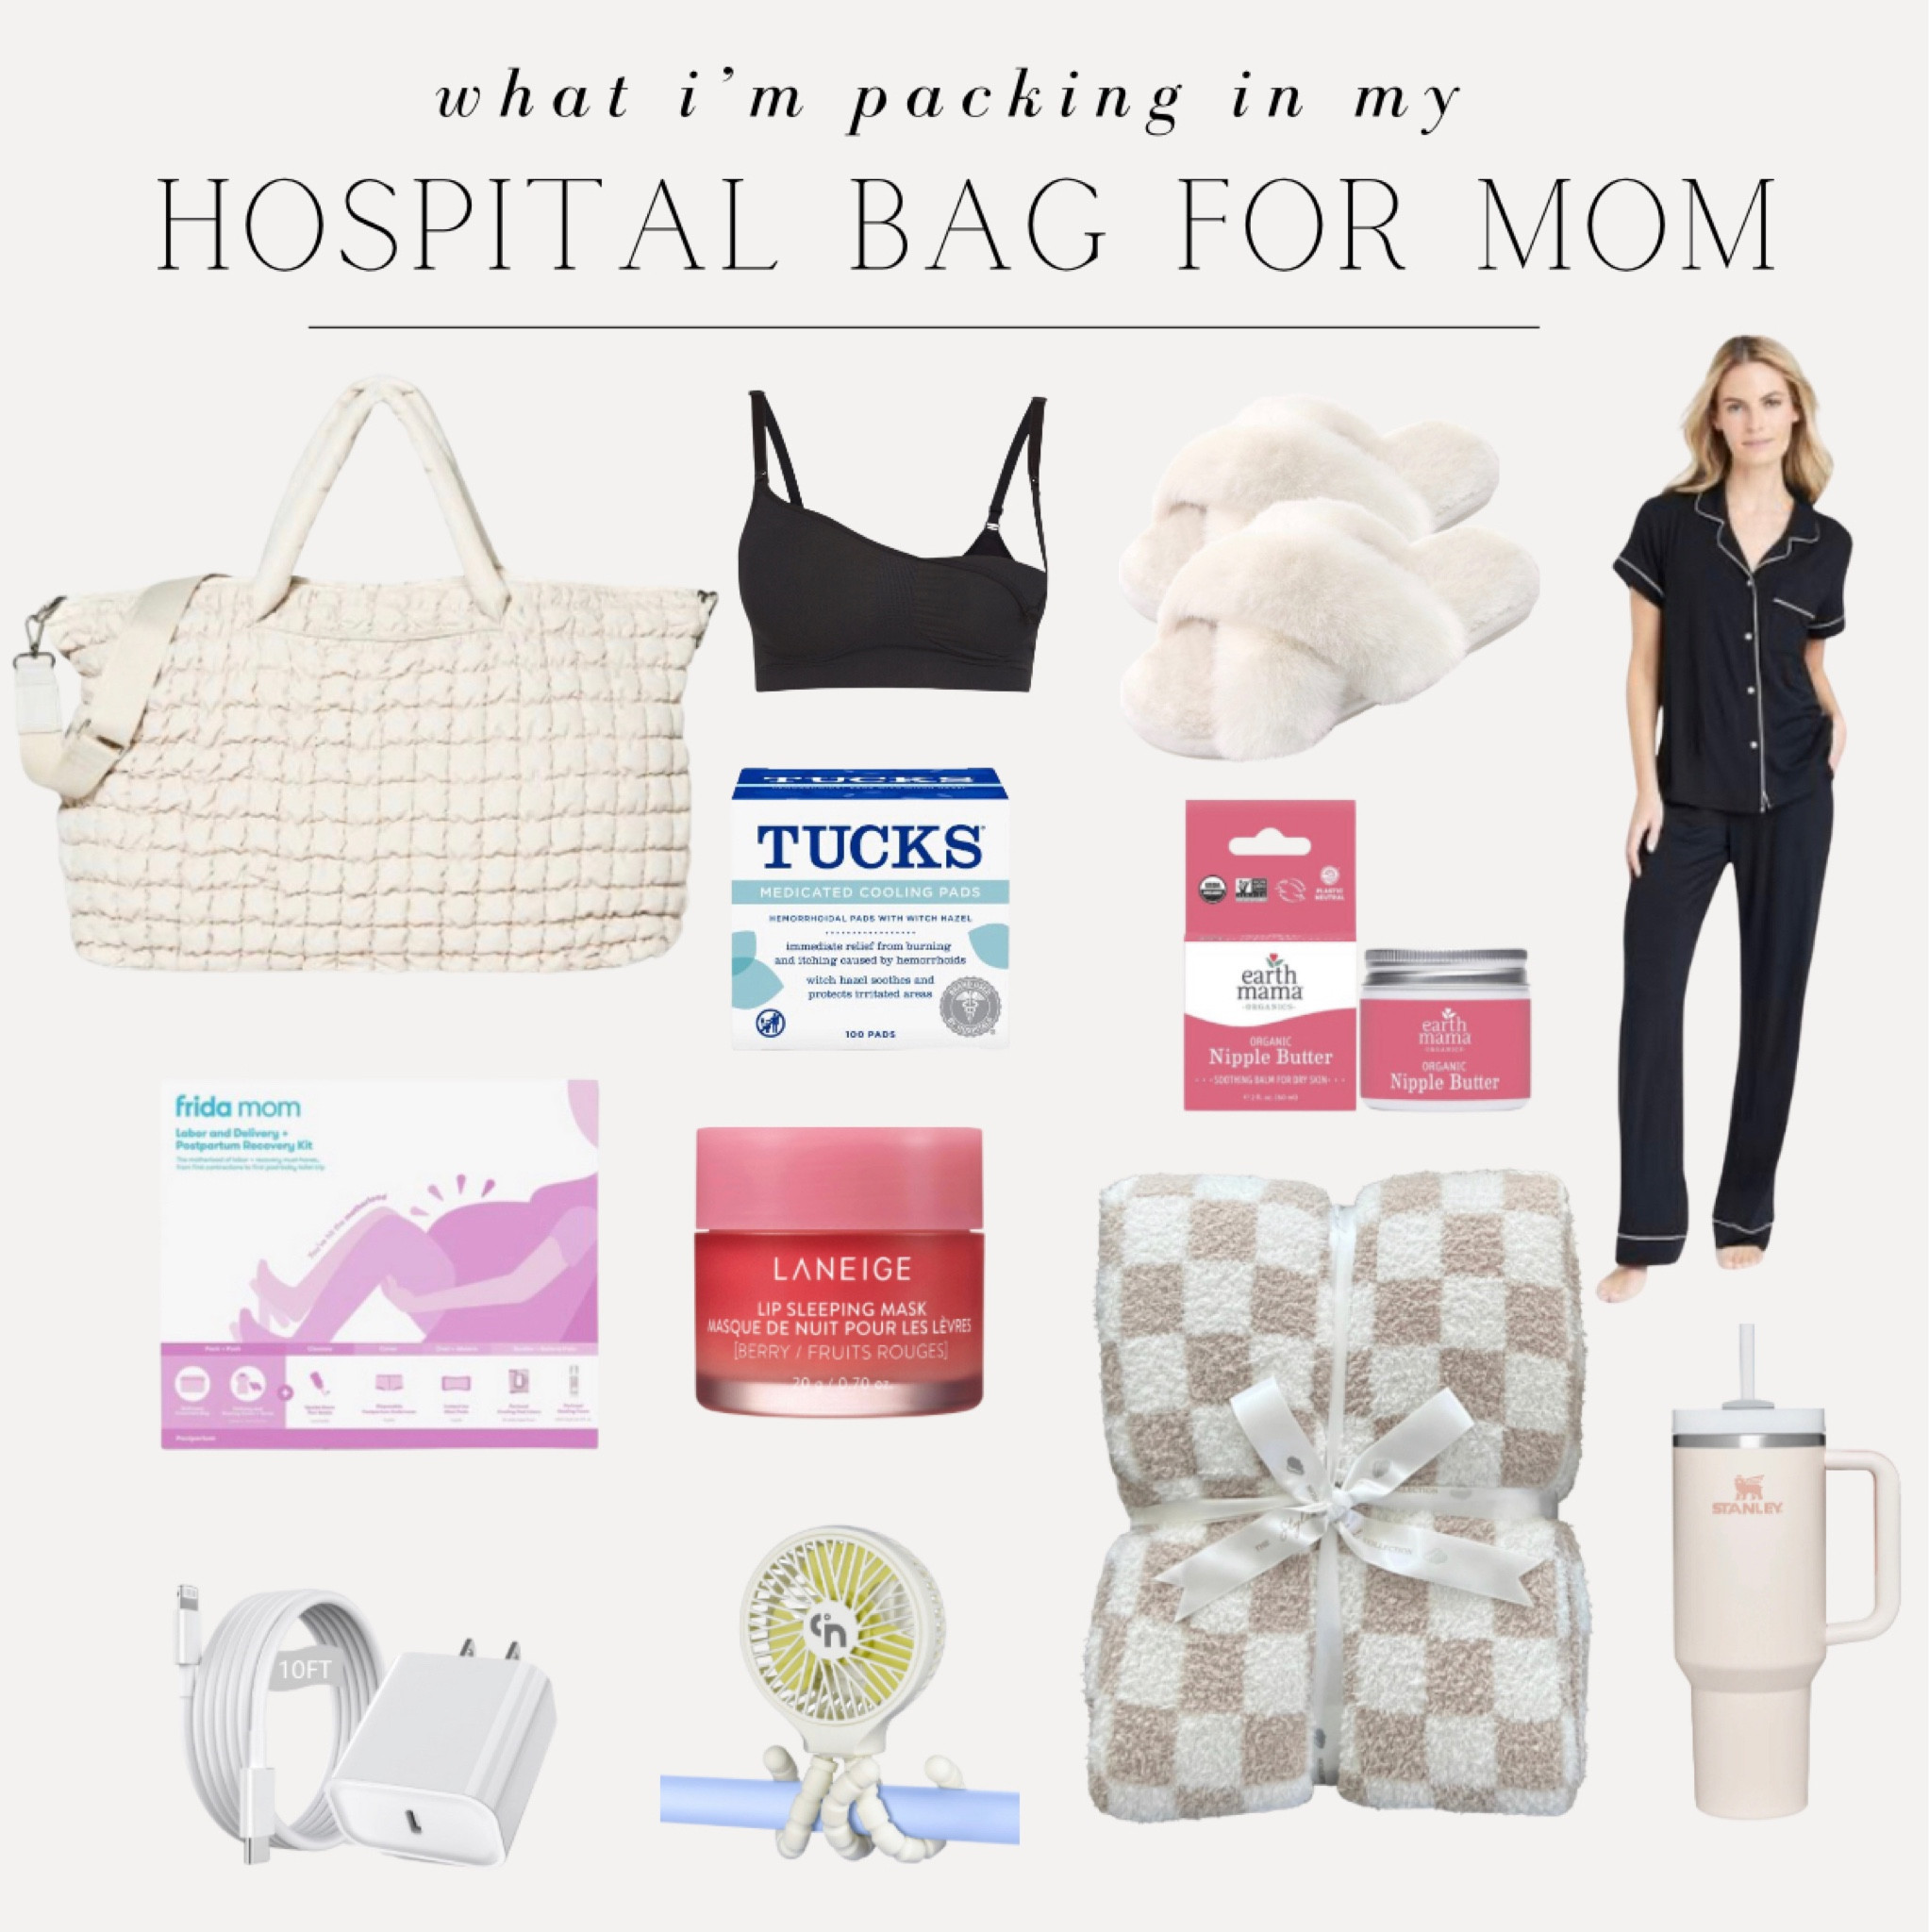 Frida Mom Labor And Delivery + Postpartum Recovery Kit